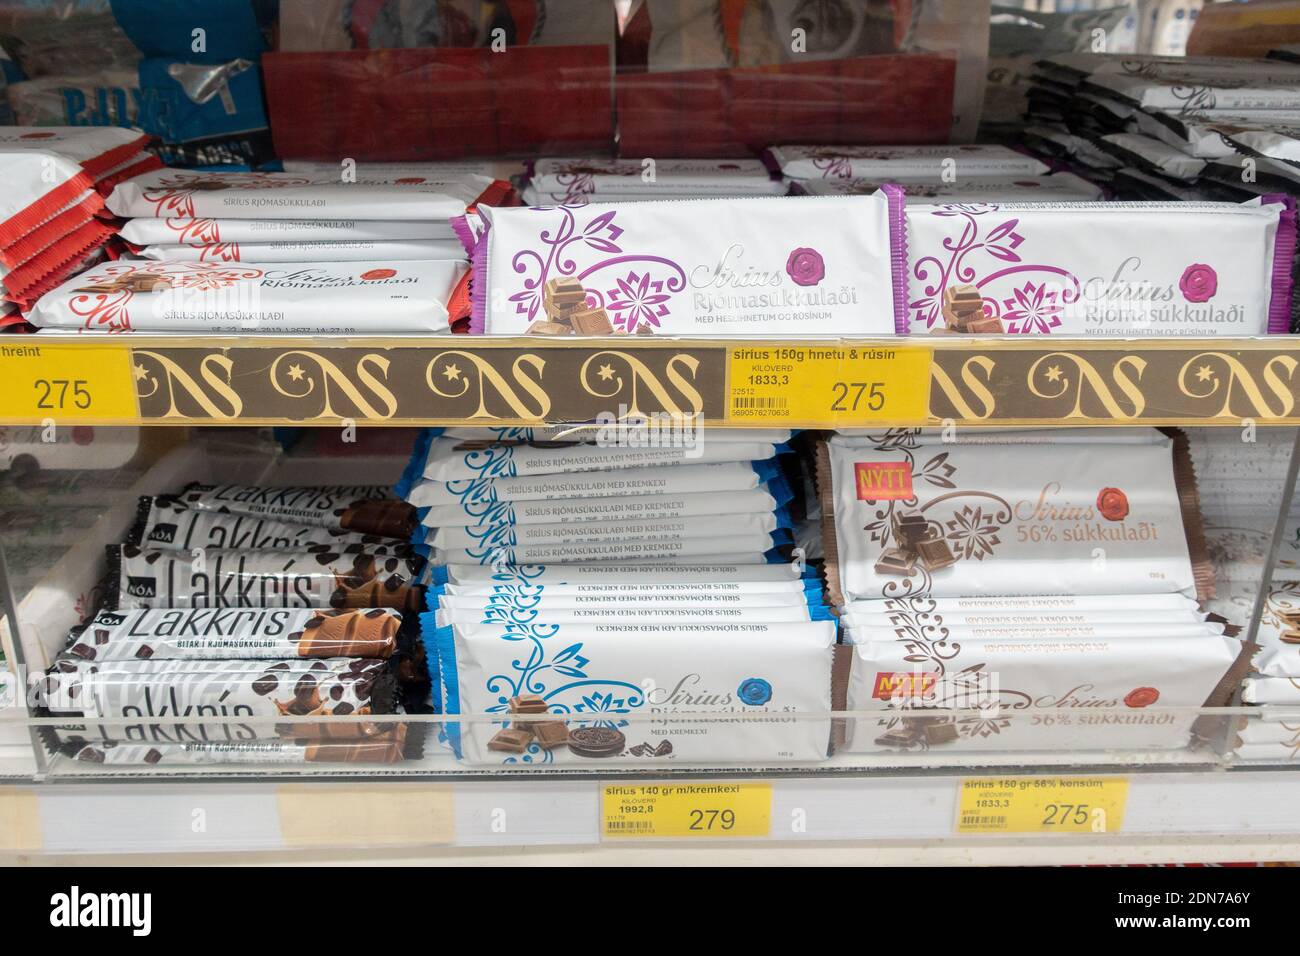 Chocolate Bars Display On A Supermarket Shelf In Iceland Stock Photo